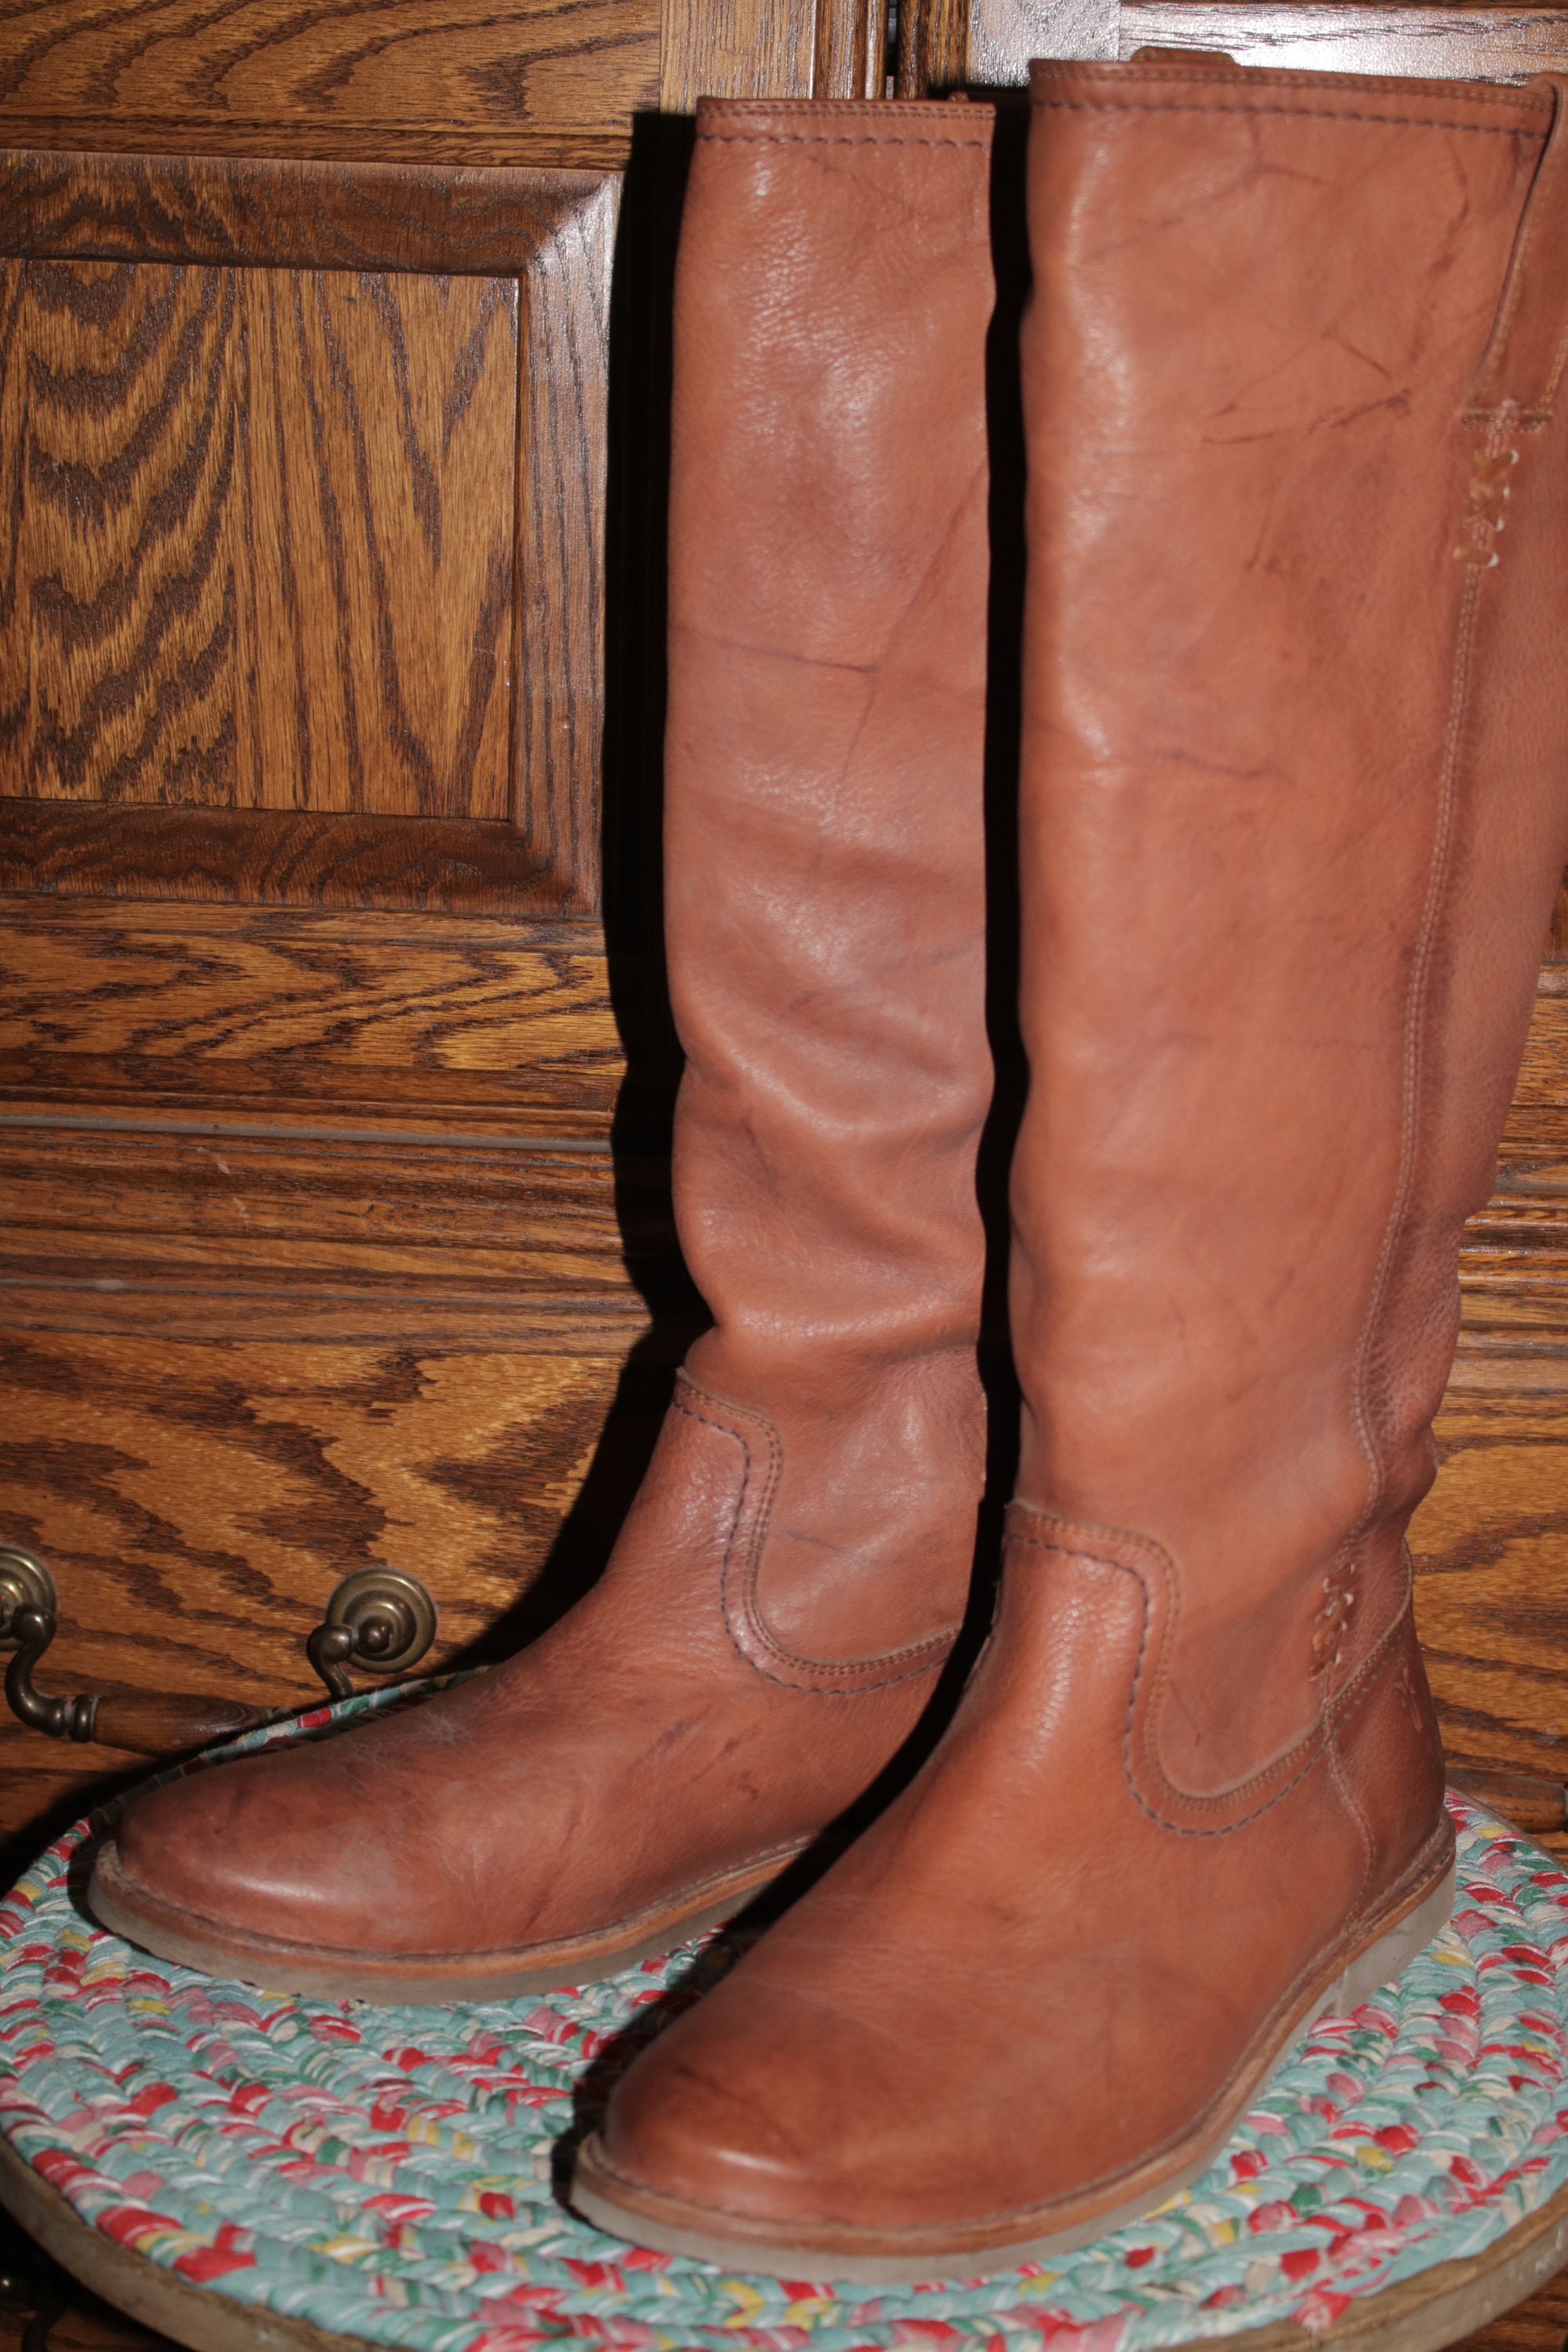 Vintage Frye Tall Riding Boots 6750 Womens Size 5.5 Brown -  Norway